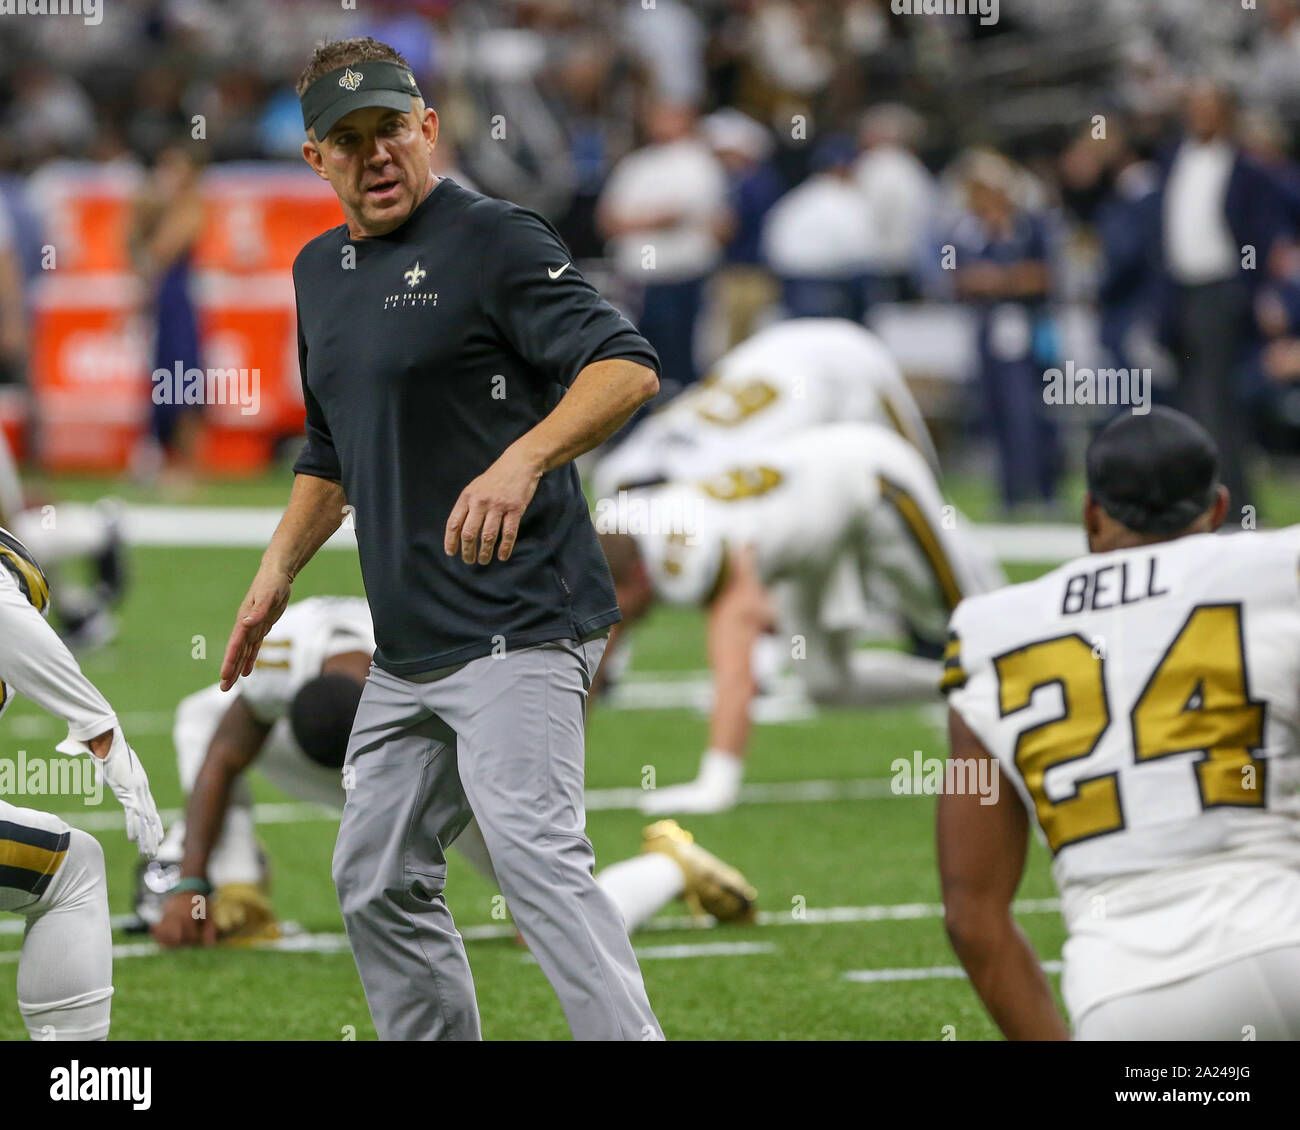 New Orleans, LA, USA. 29th Sep, 2019. New Orleans Saints Head Coach Sean Payton encourages defensive end Vonn Bell (24) before the game between the New Orleans Saints and the Dallas Cowboys at the Mercedes Benz Superdome in New Orleans, LA. Jonathan Mailhes/CSM/Alamy Live News Stock Photo